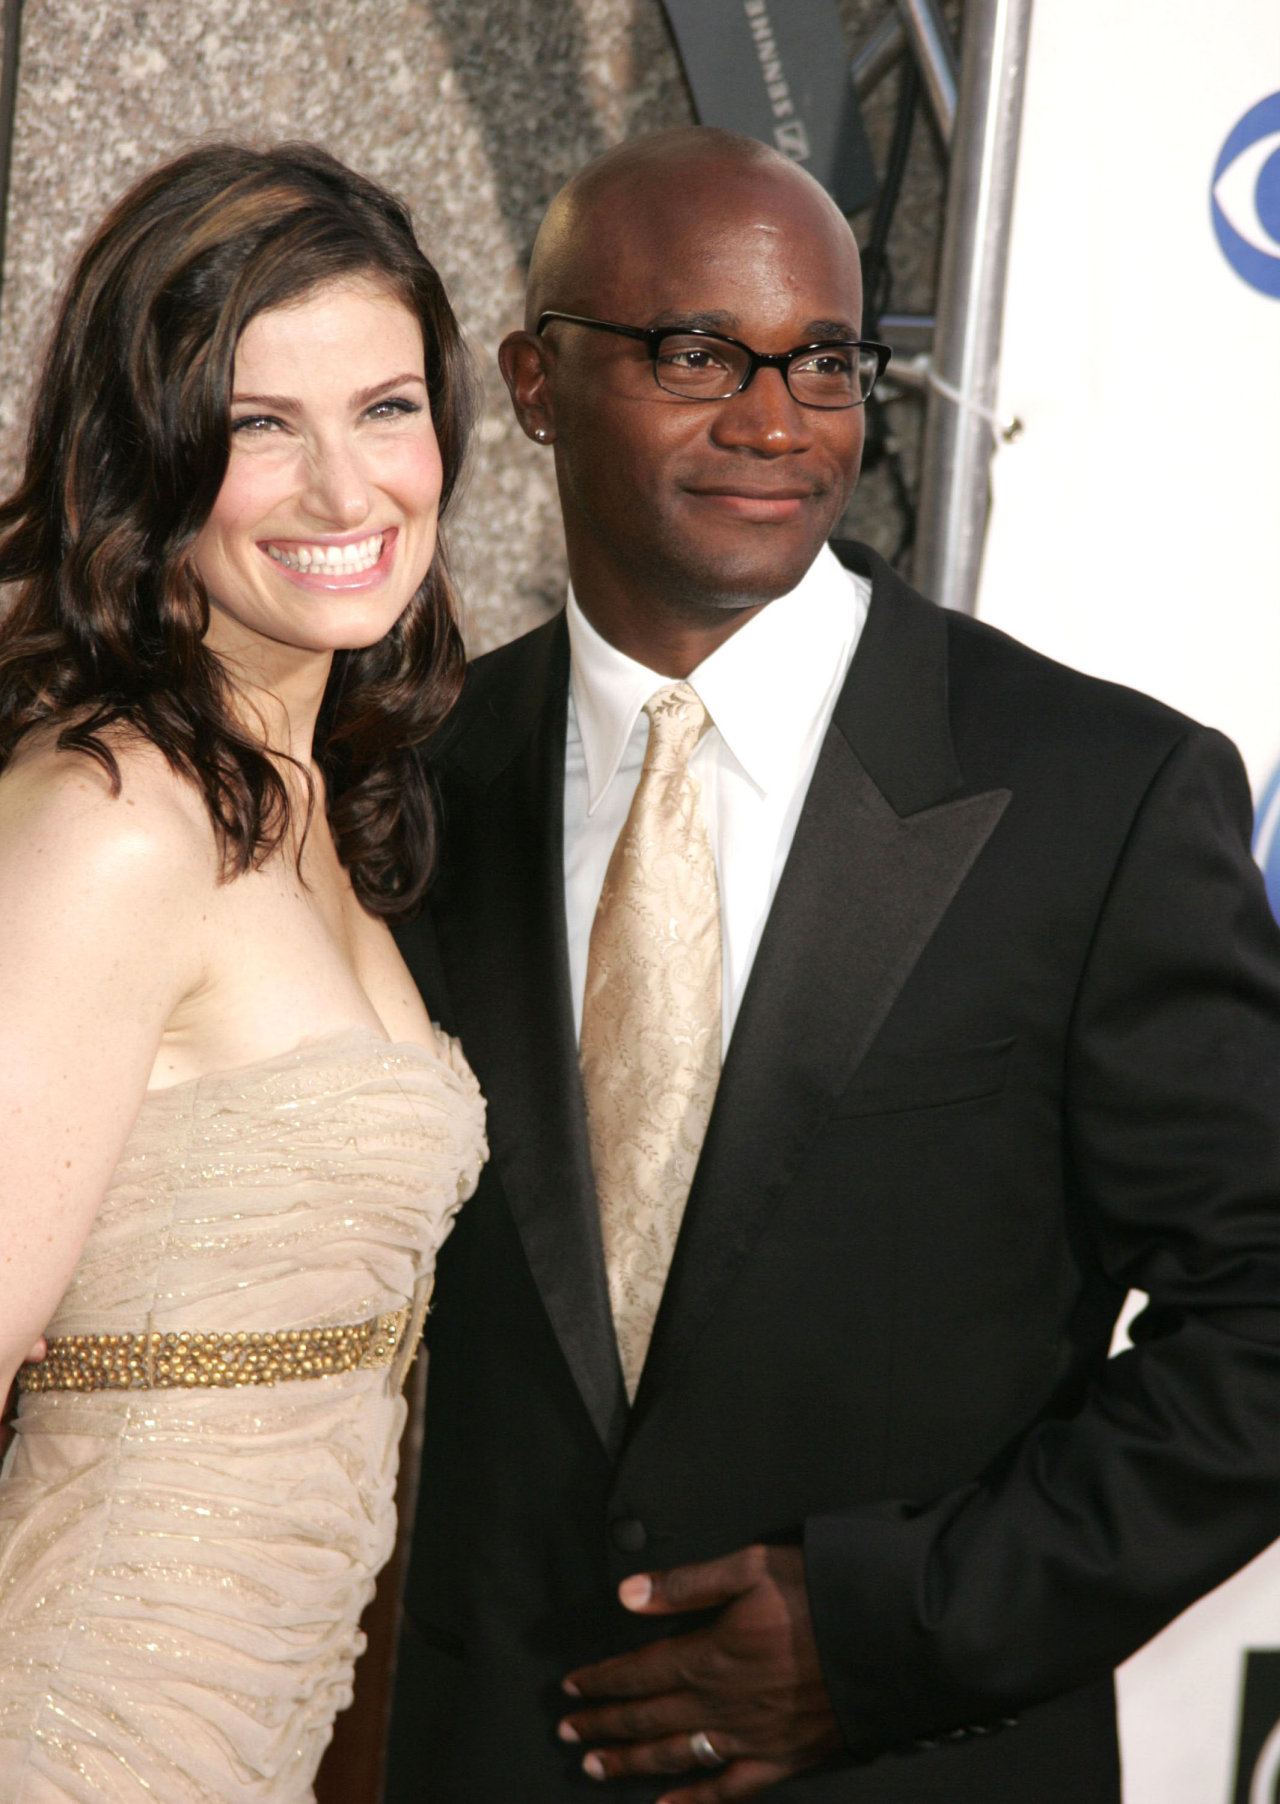 Idina Menzel leaked wallpapers